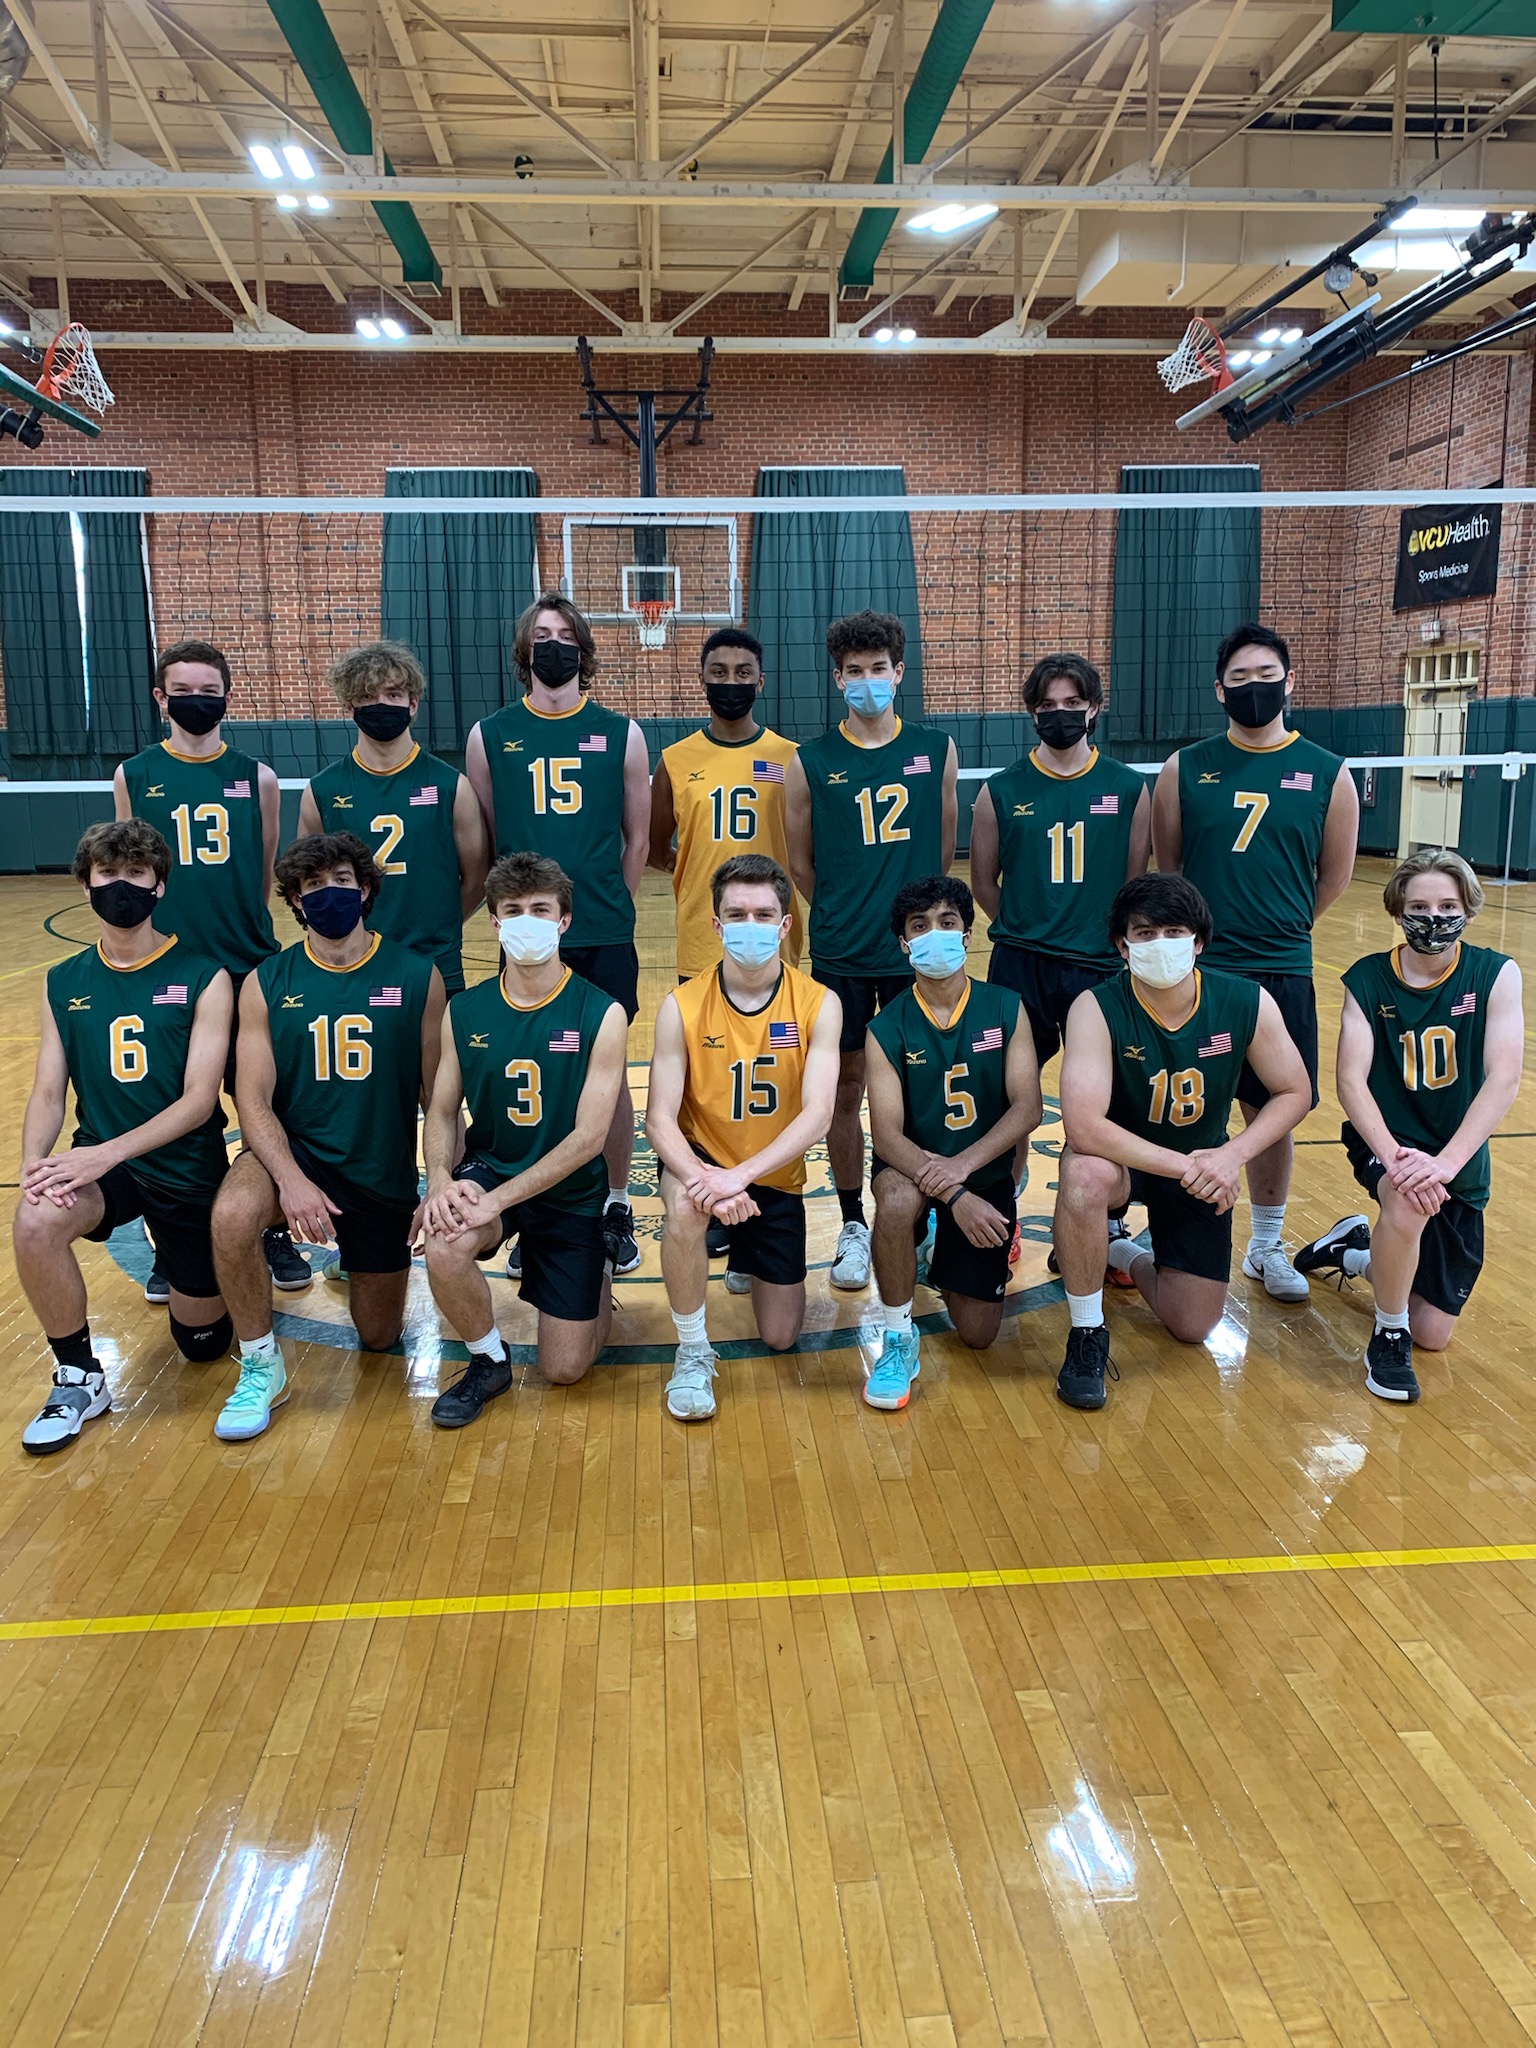 Livestream link for the Boys Volleyball VHSL State Championship Game today